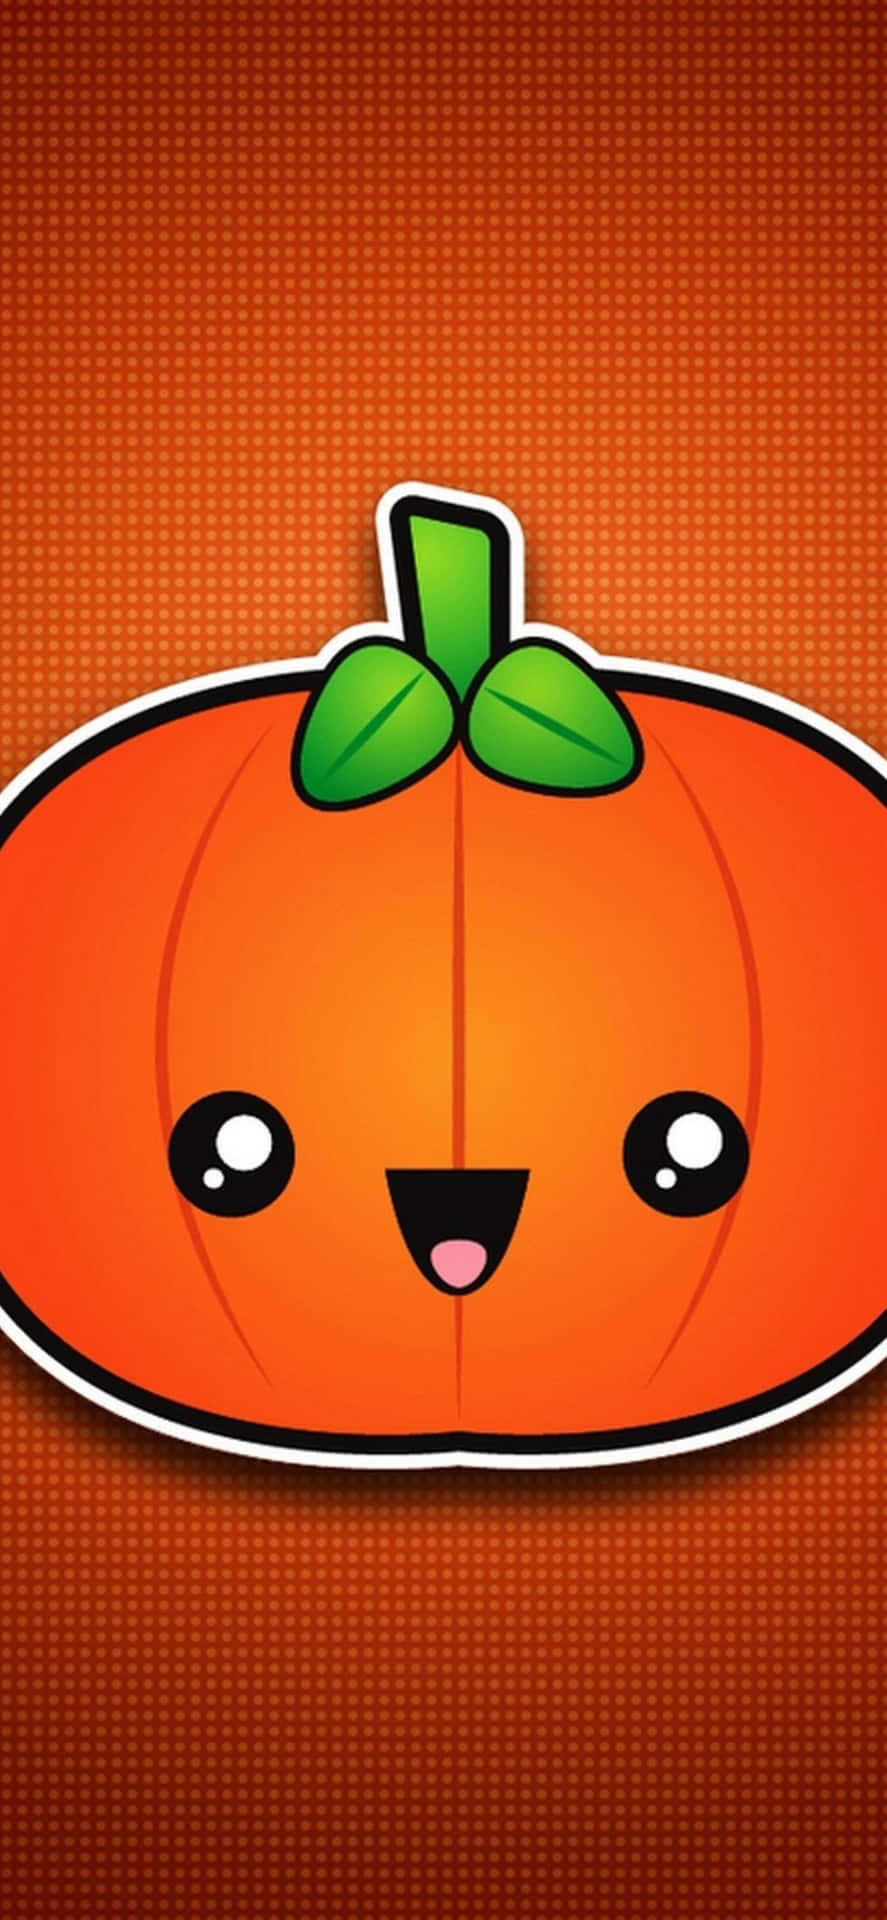 Get in the spirit of Halloween with this festive iPhone wallpaper